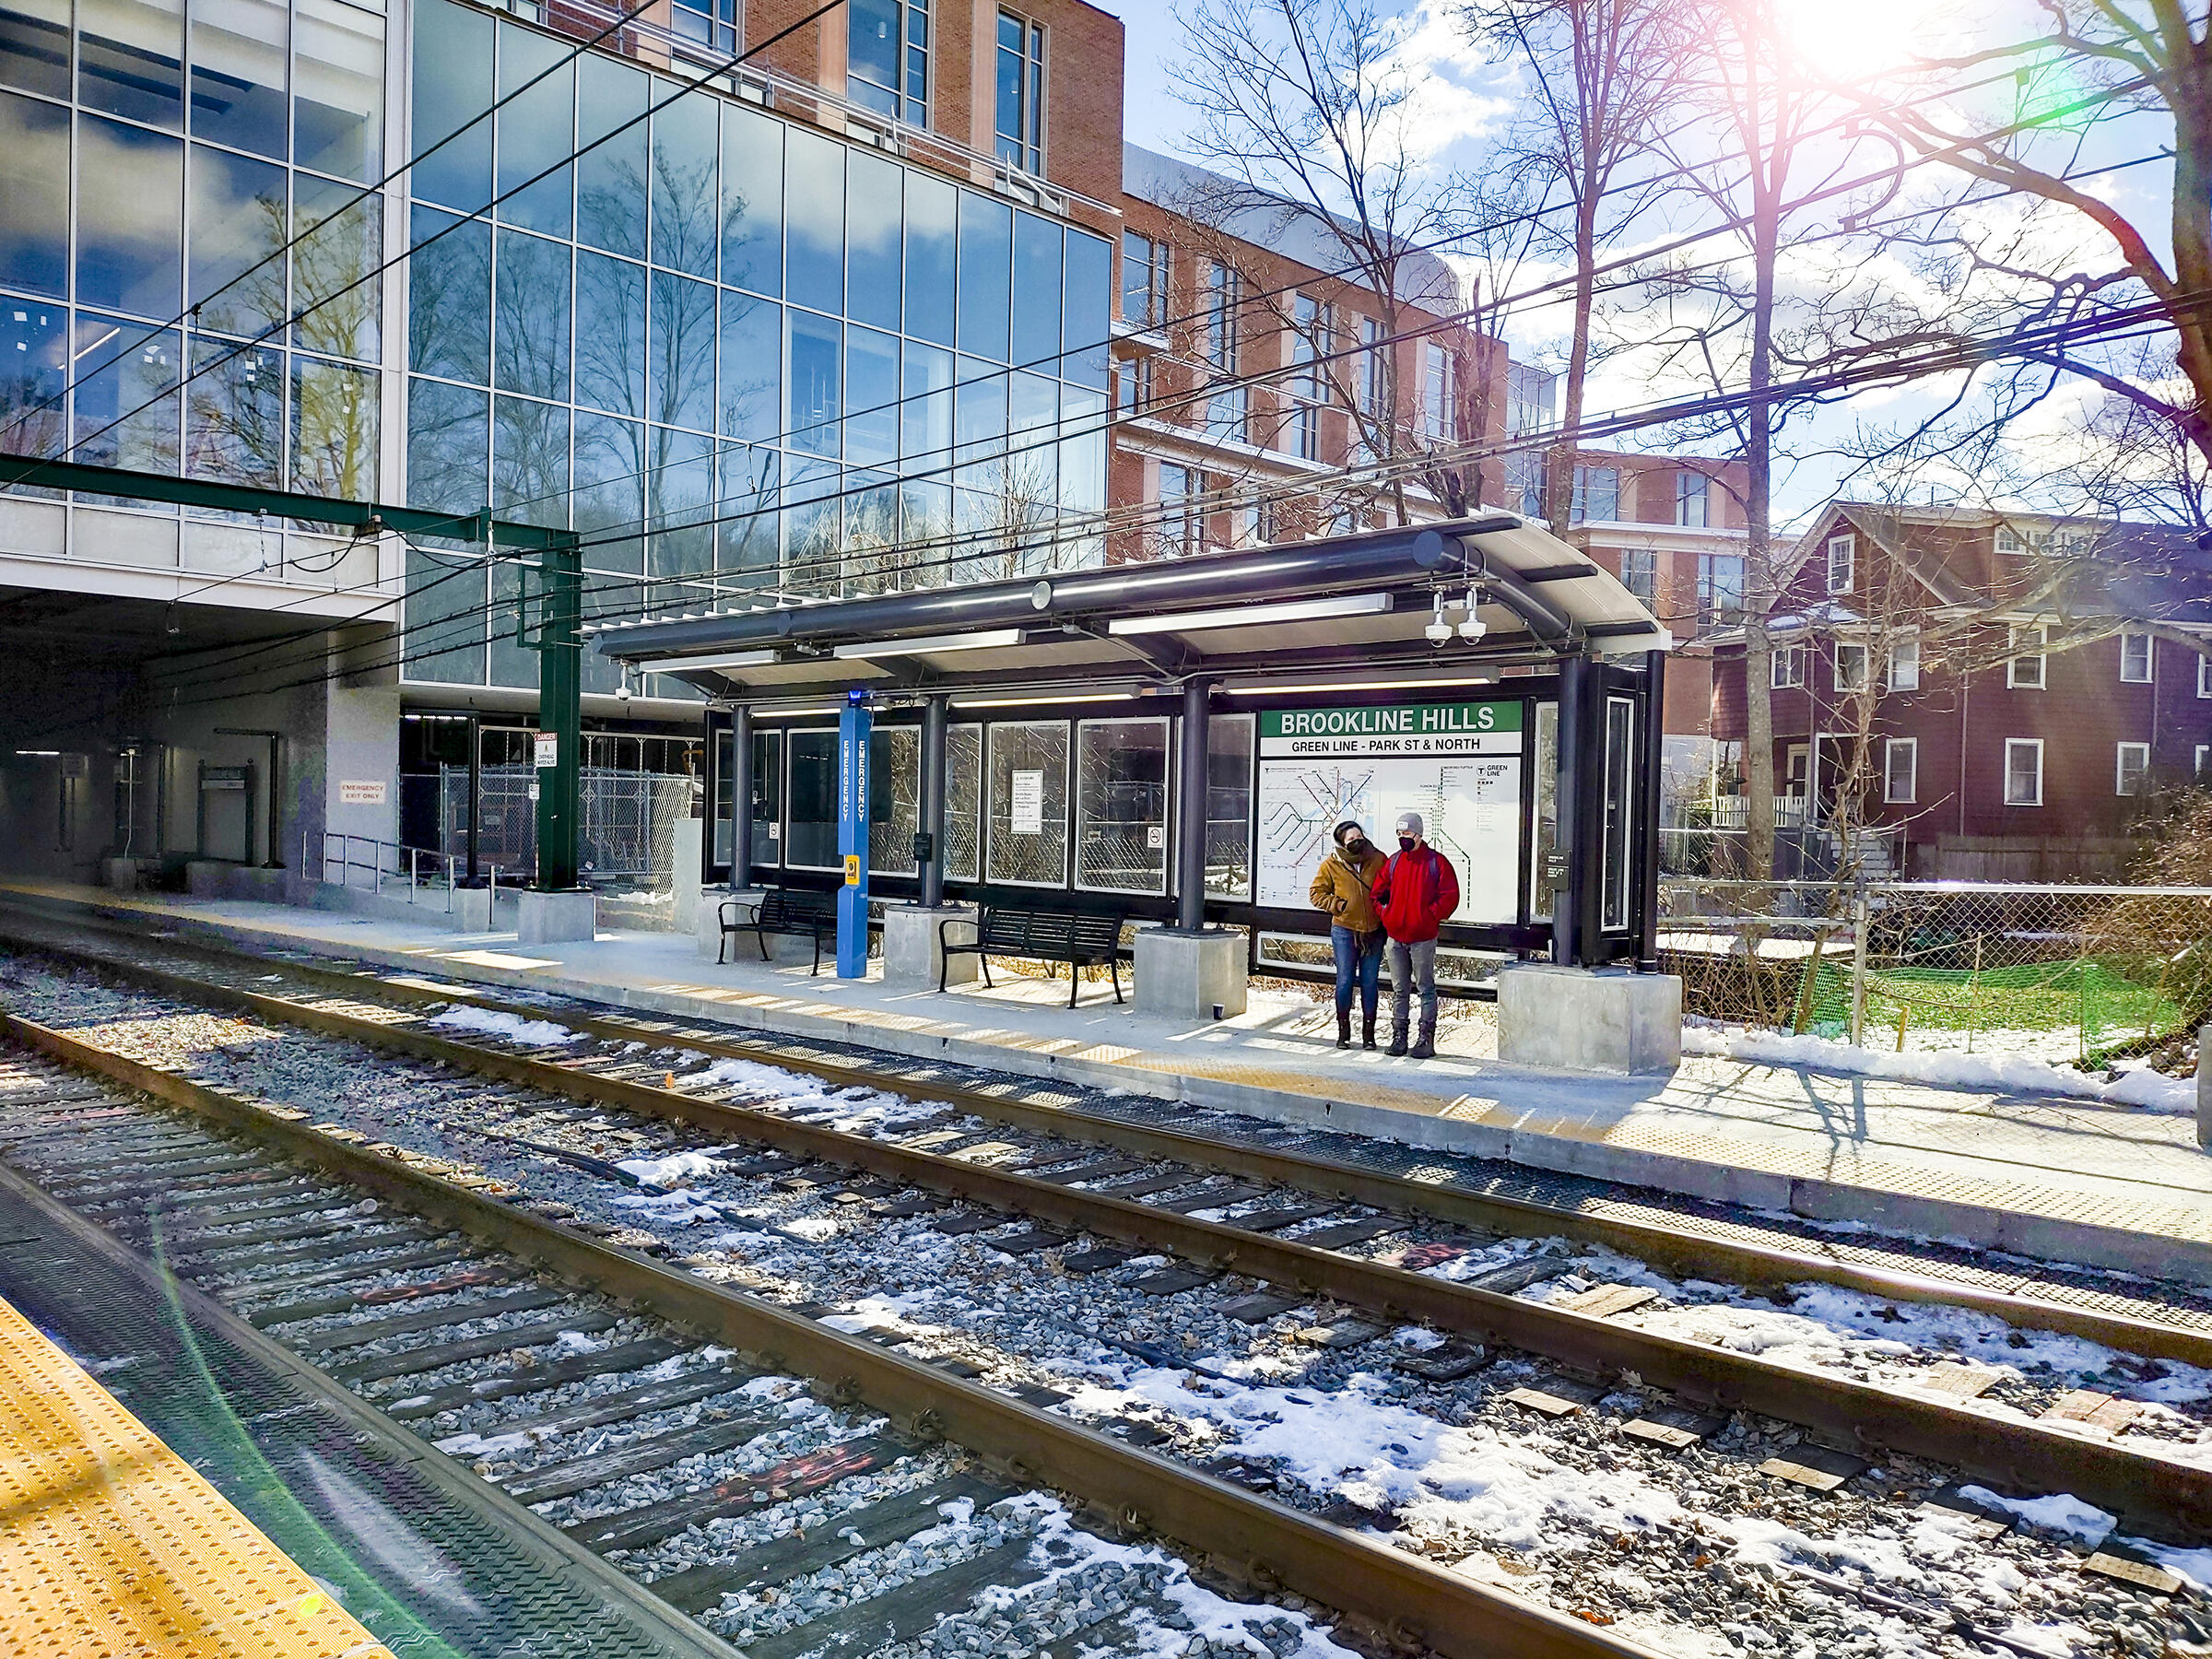 Completed work at Brookline Hills Station includes upgrades to safety systems, new canopies and benches, and more.